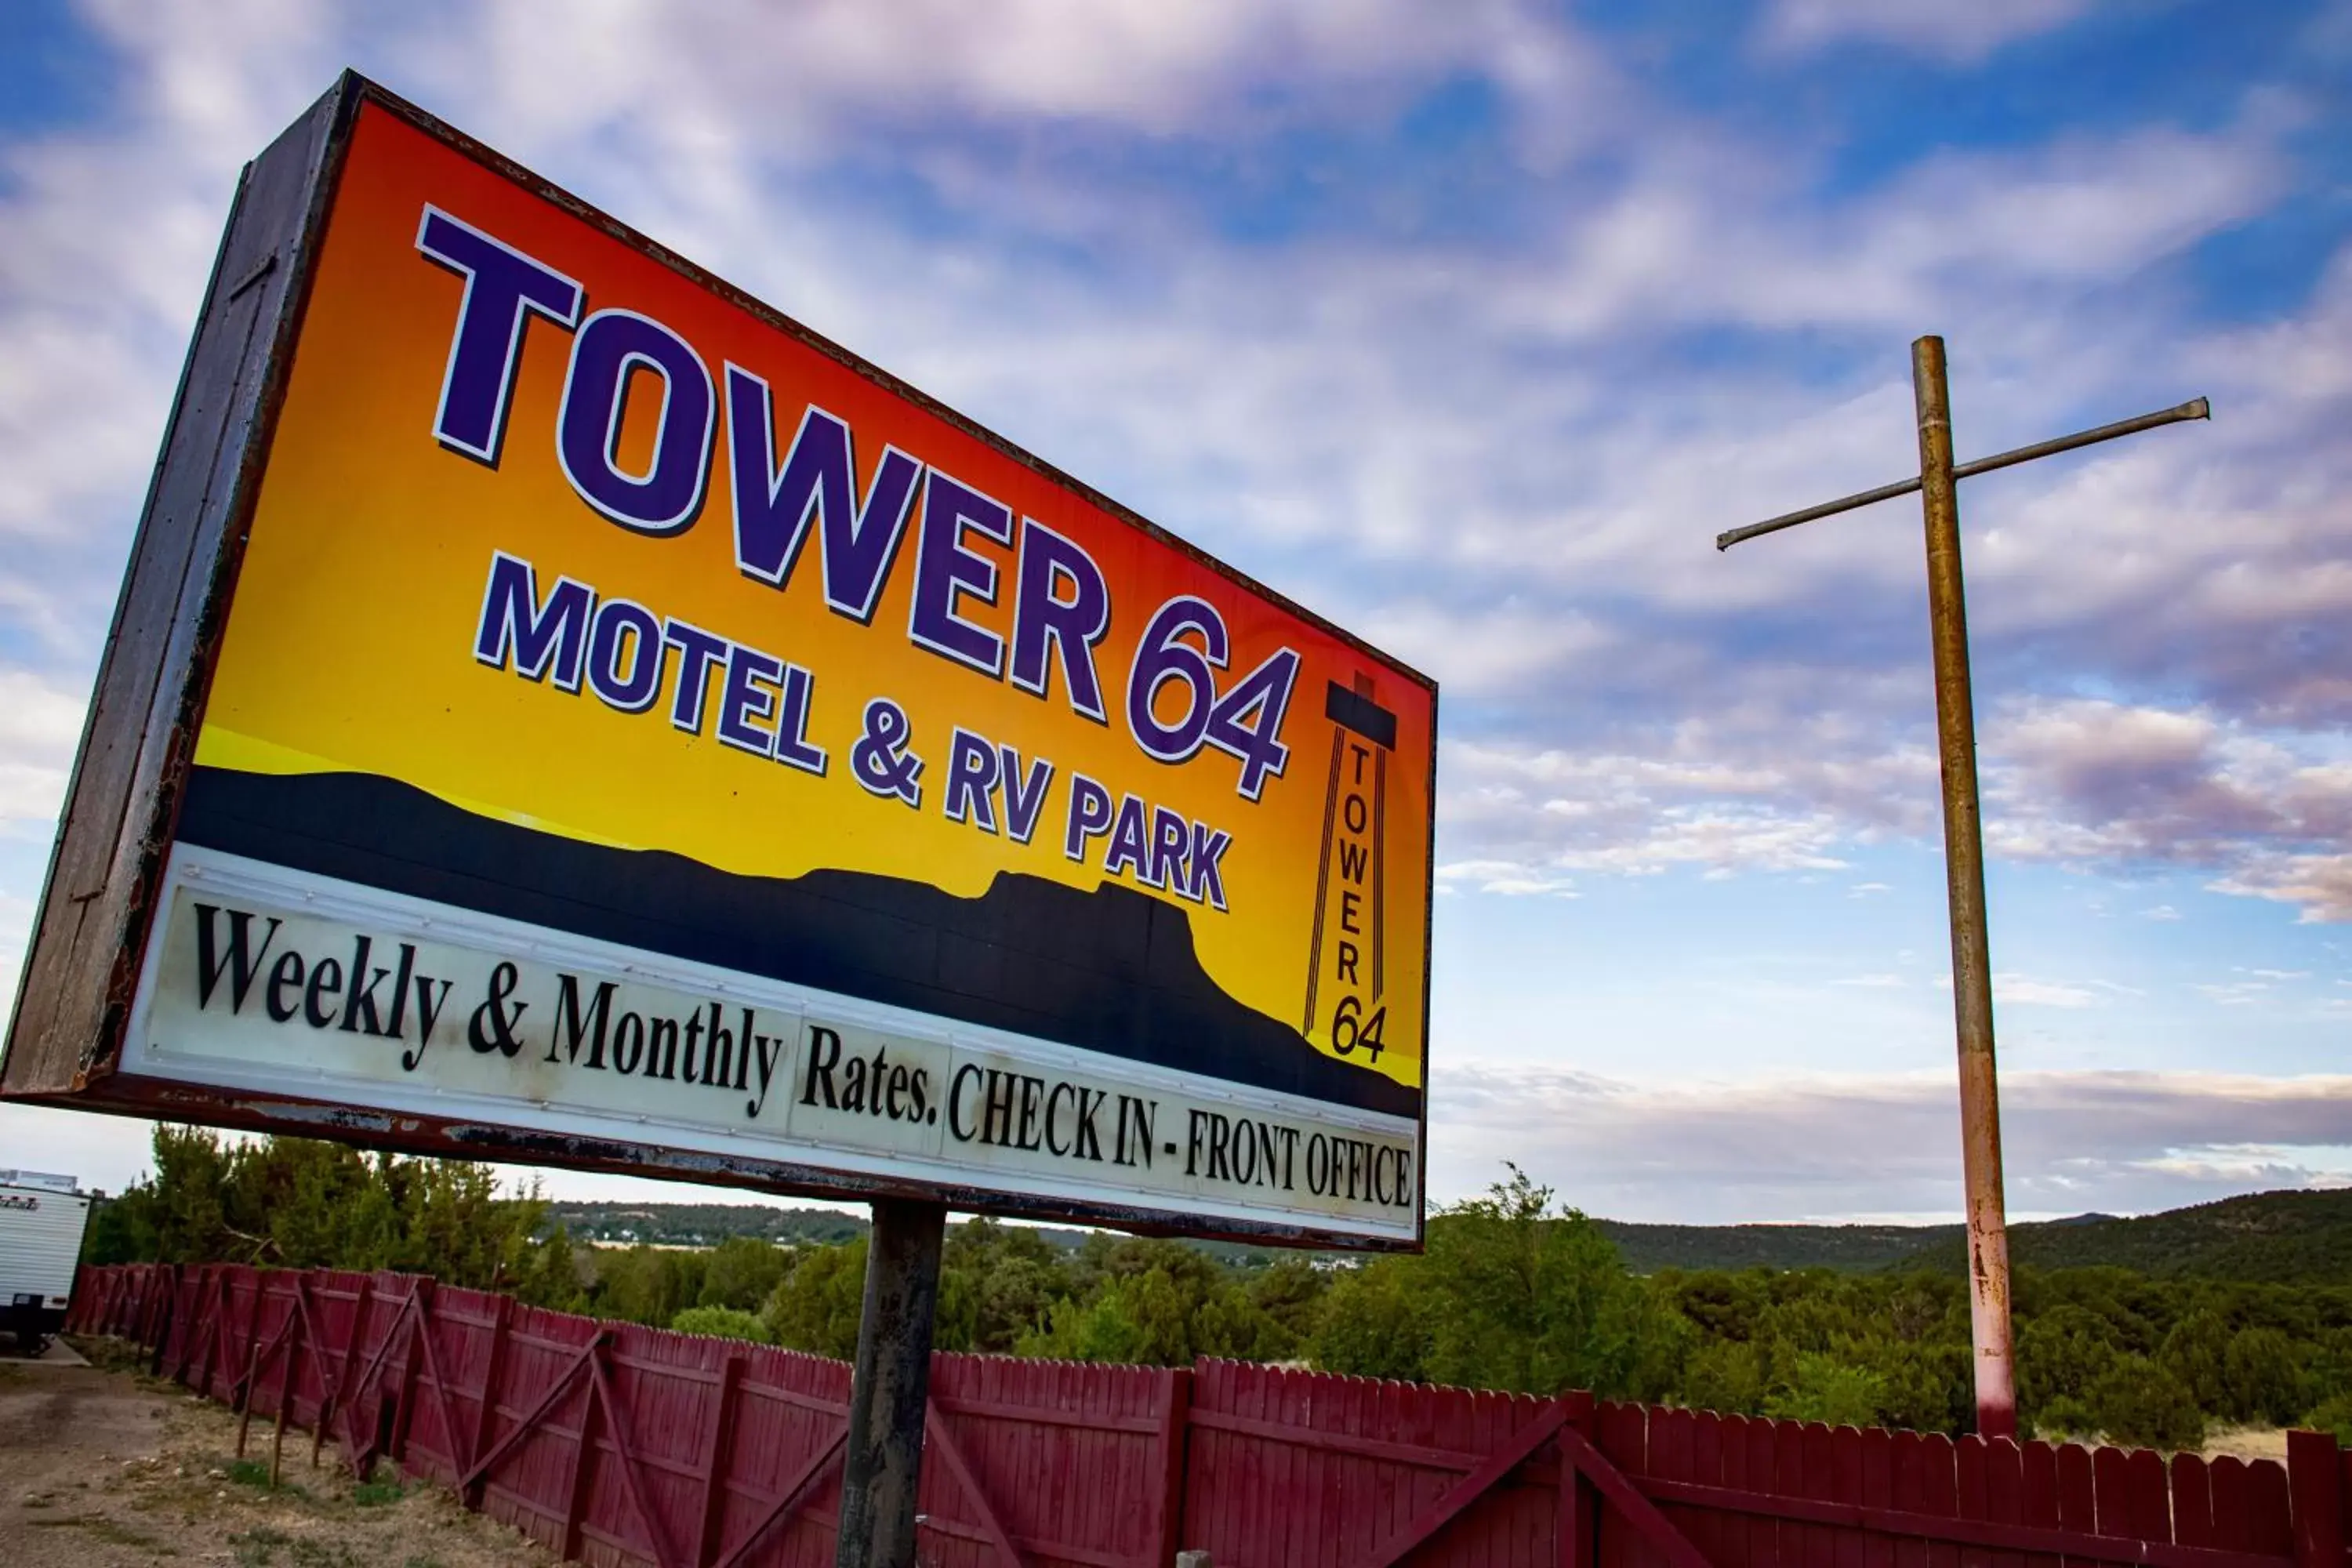 Property building in Tower 64 Motel & RV